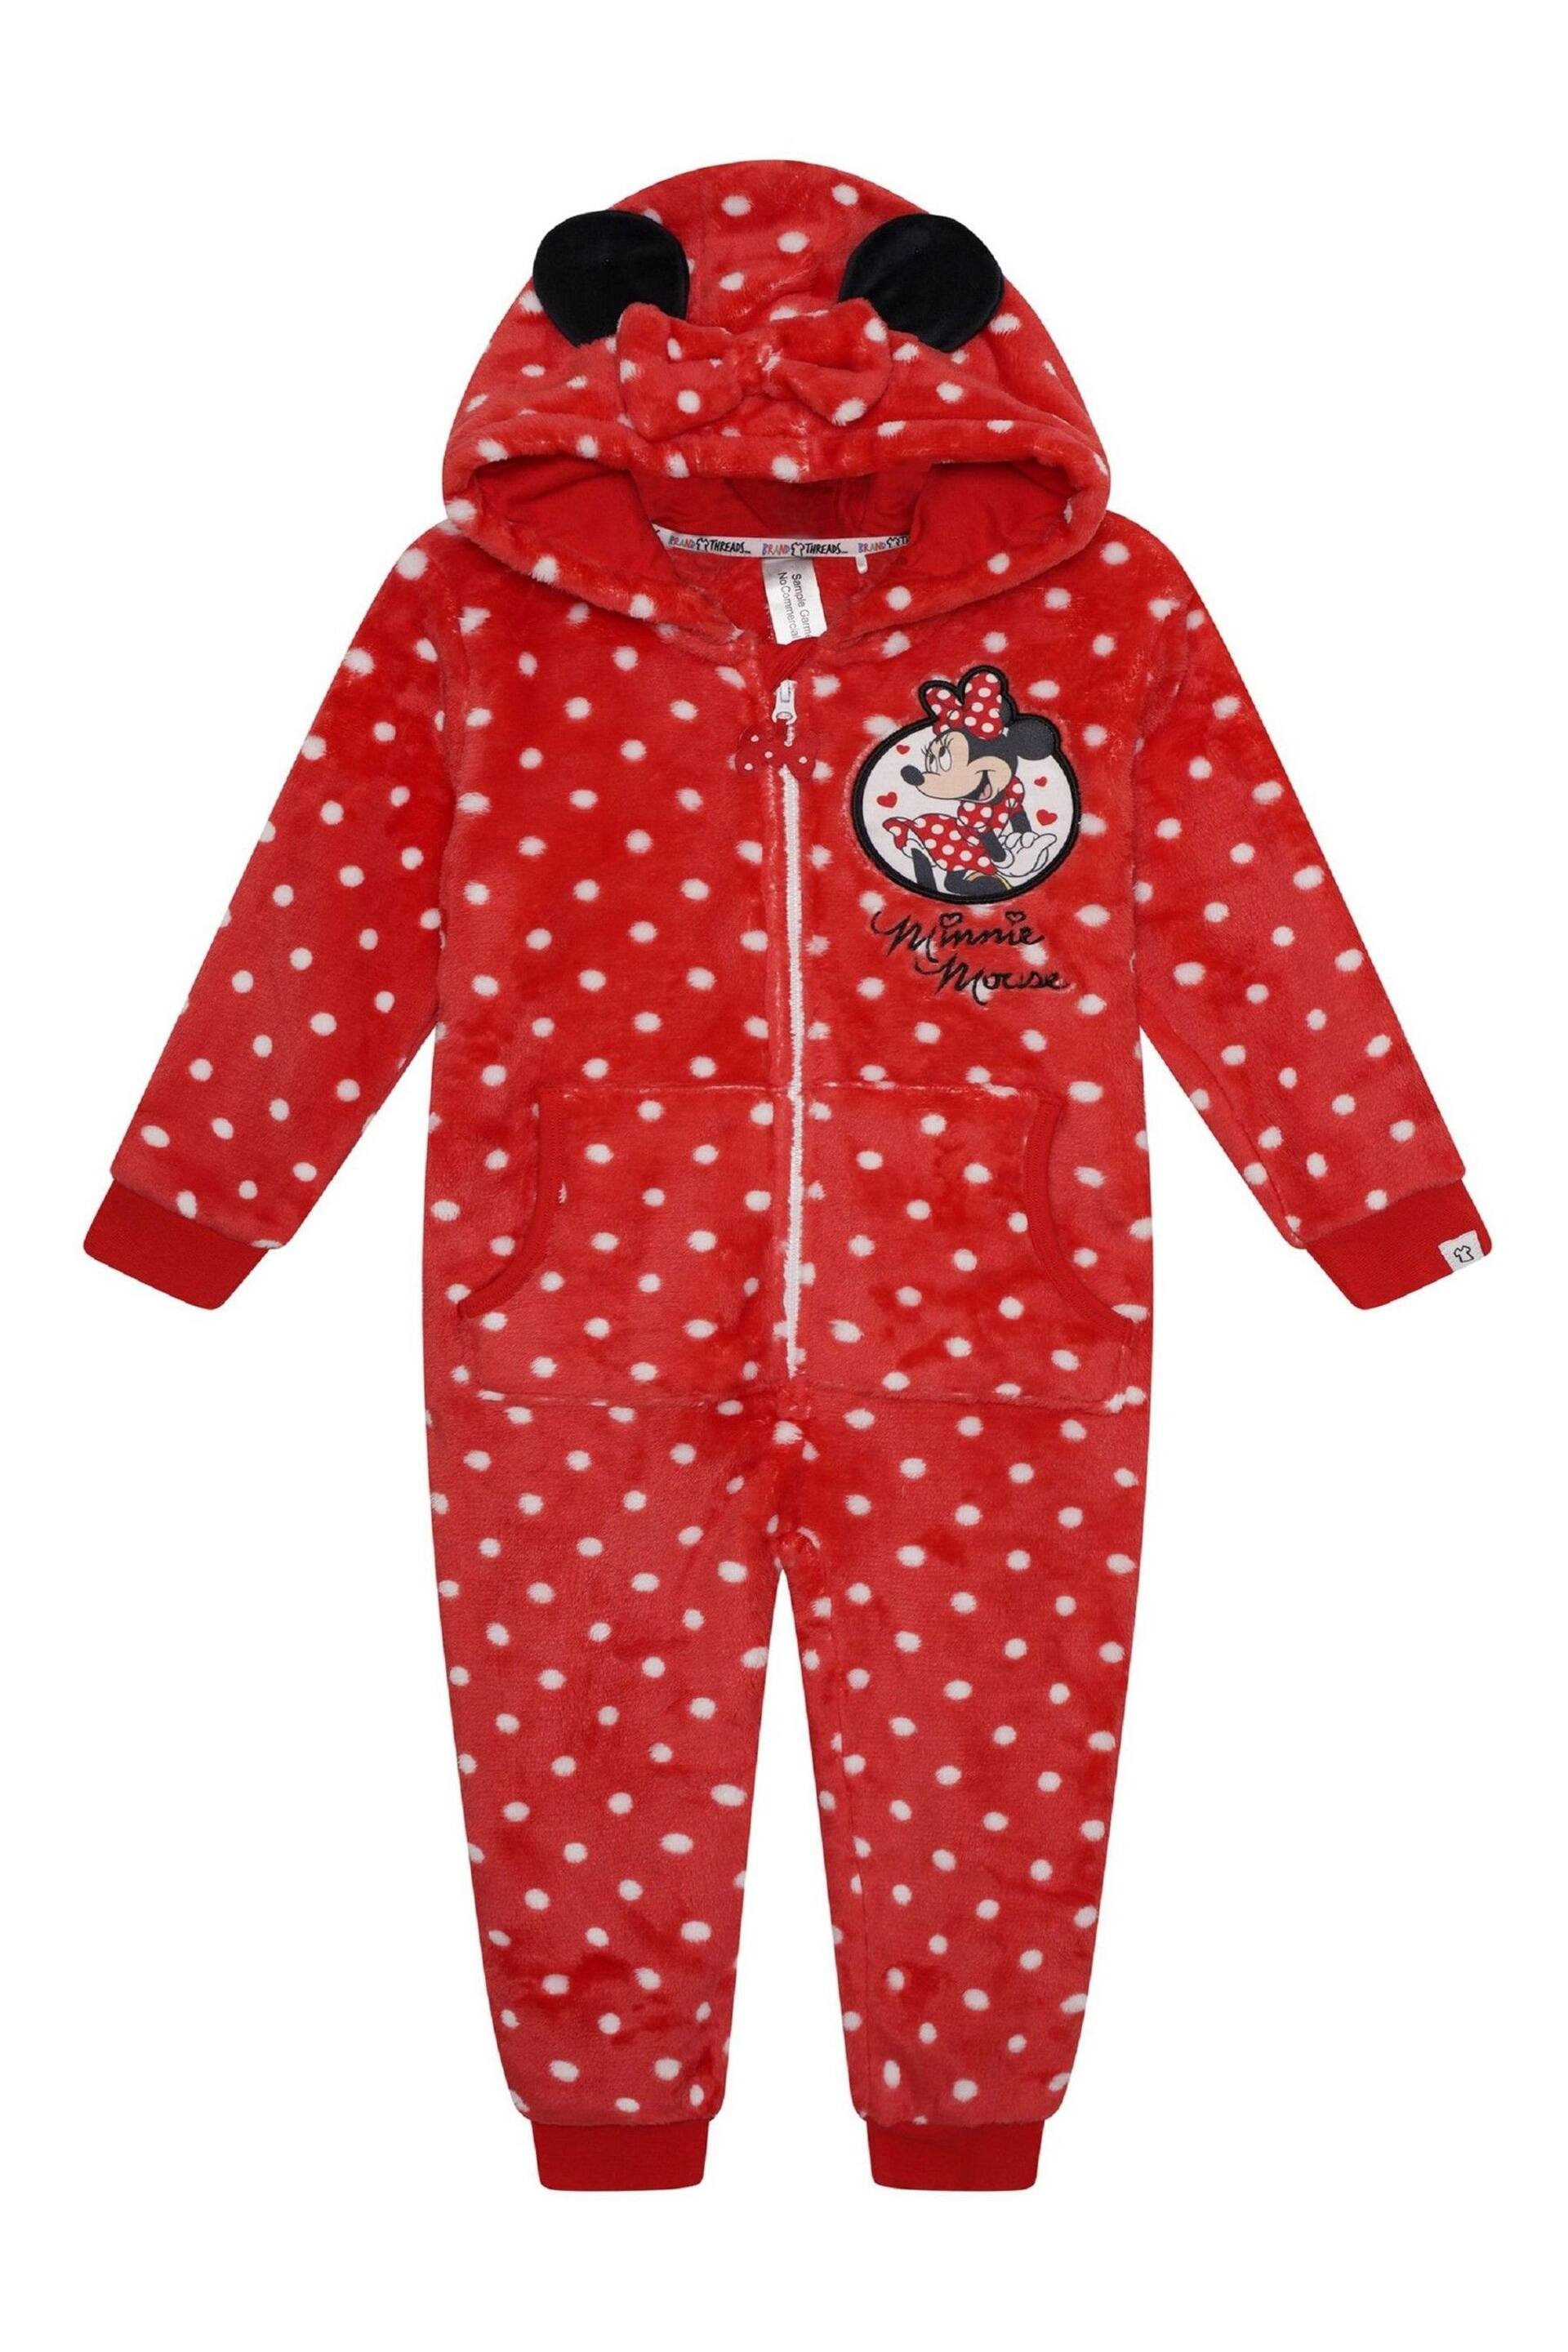 Brand Threads Red Disney Minnie Mouse Girls Hooded Onesie - Image 4 of 5